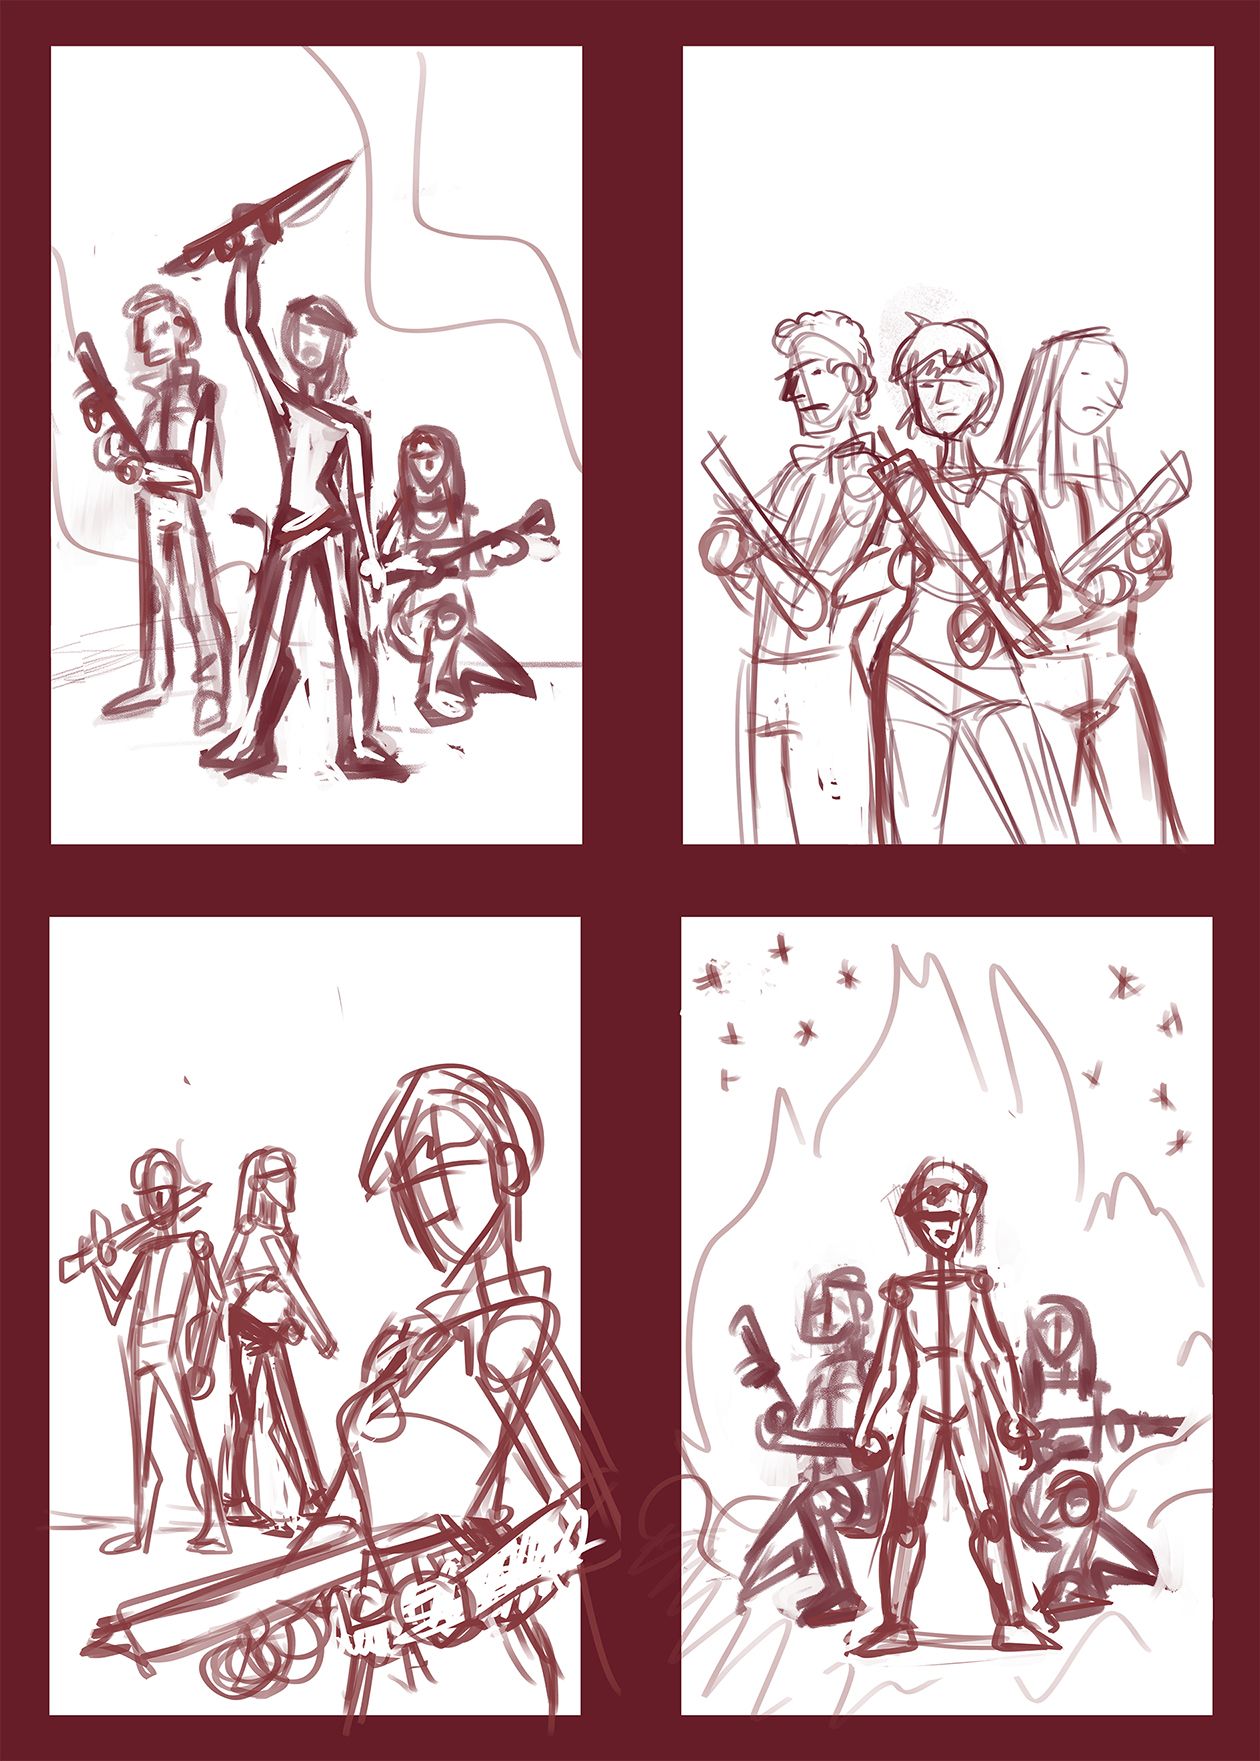 Designing the Variant Cover for CHAPTER 7